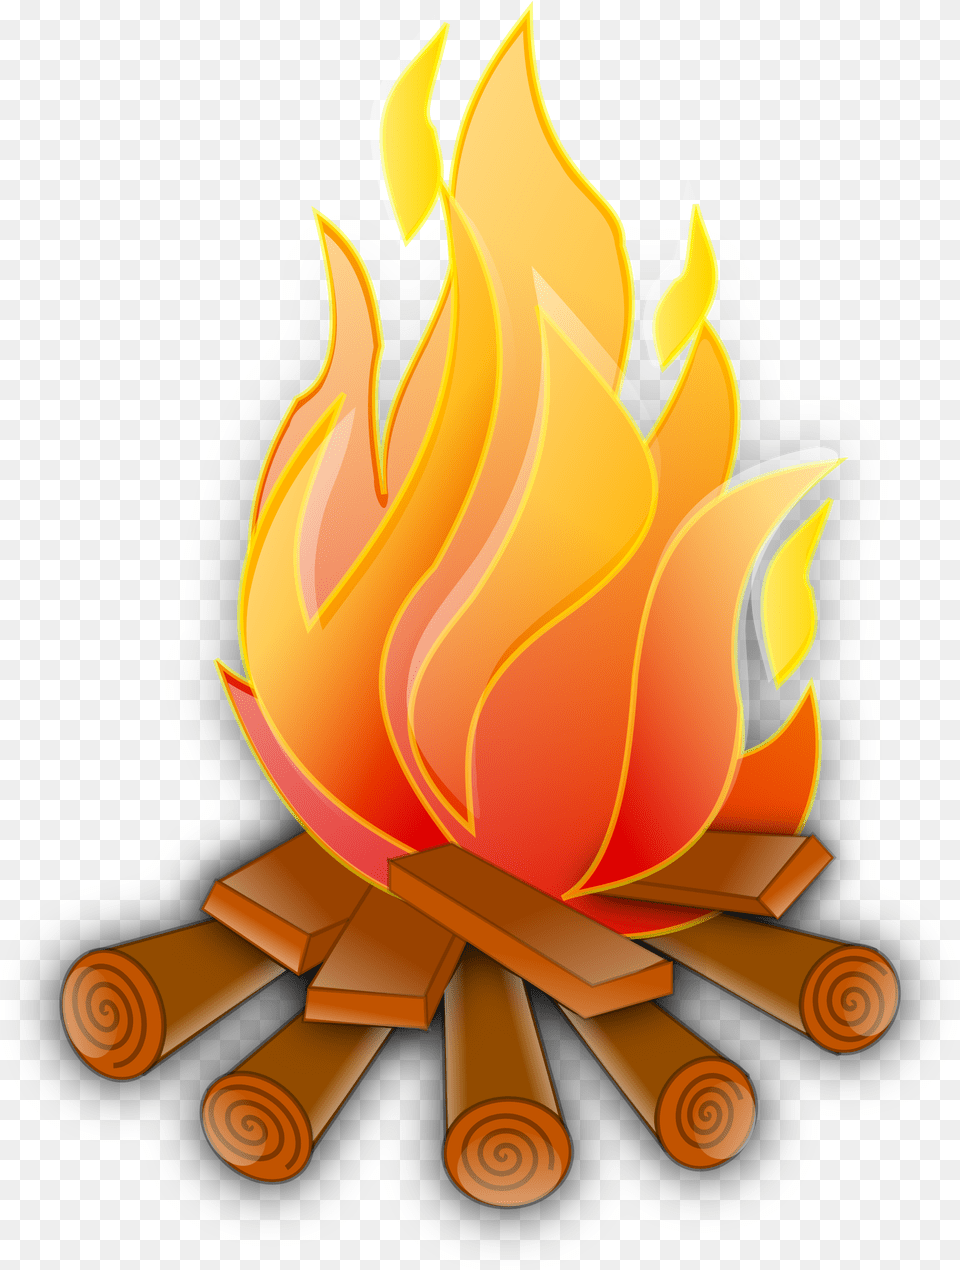 Flames Clipart Fire Clipart Of Fire, Flame, Bonfire Free Png Download